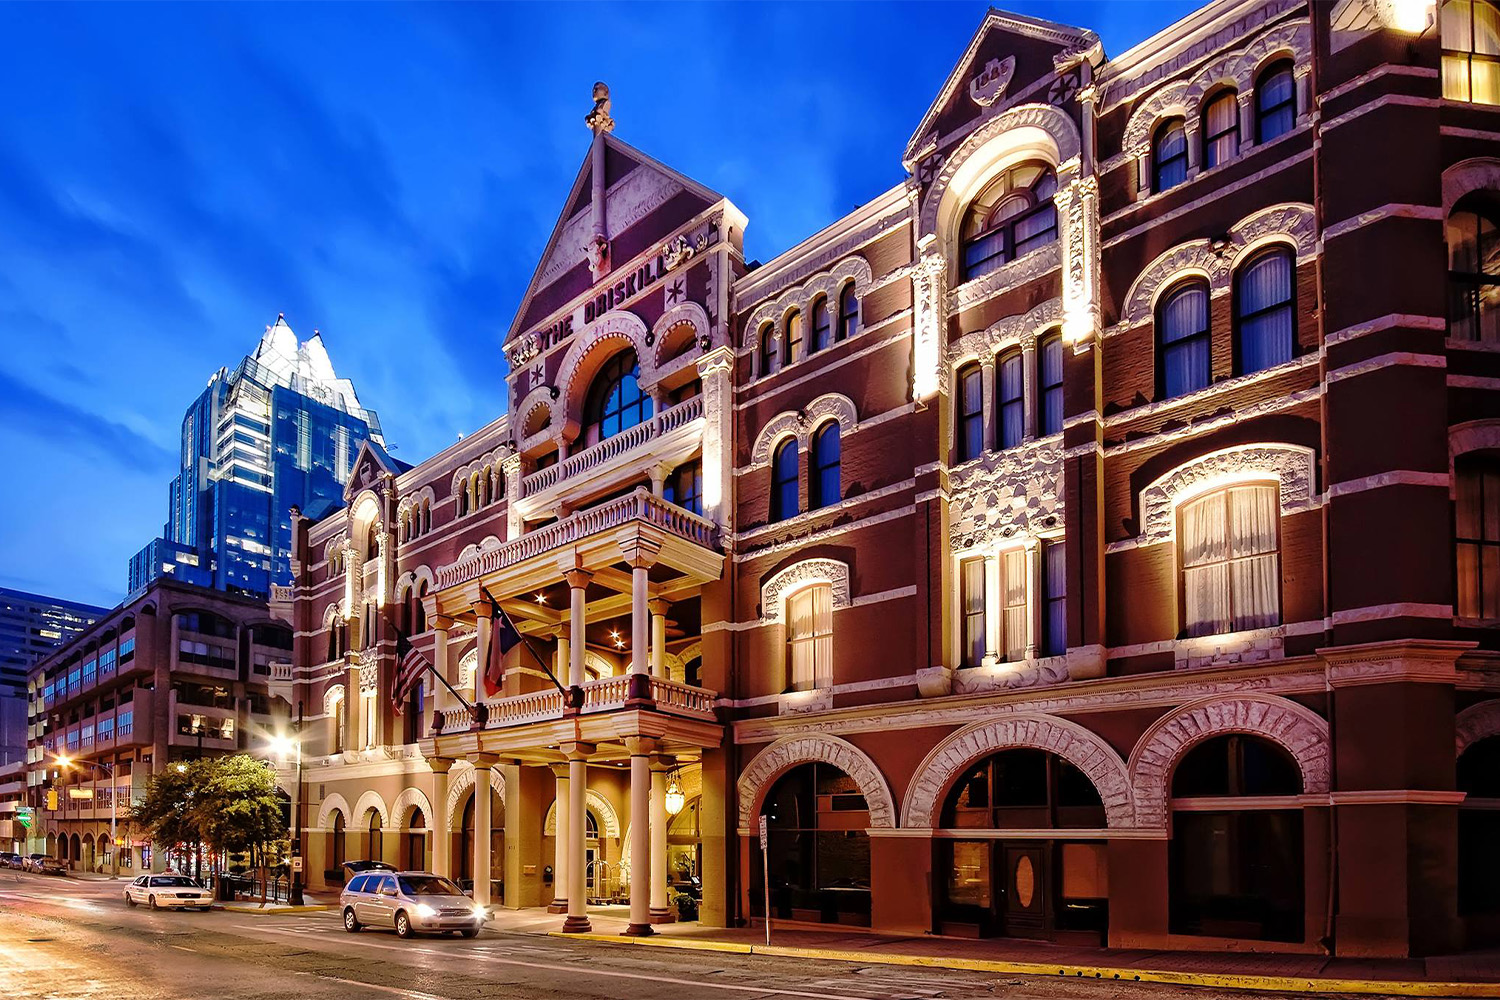 The Driskell Hotel in Austin, Texas, photographed with the lights on as the sun sets